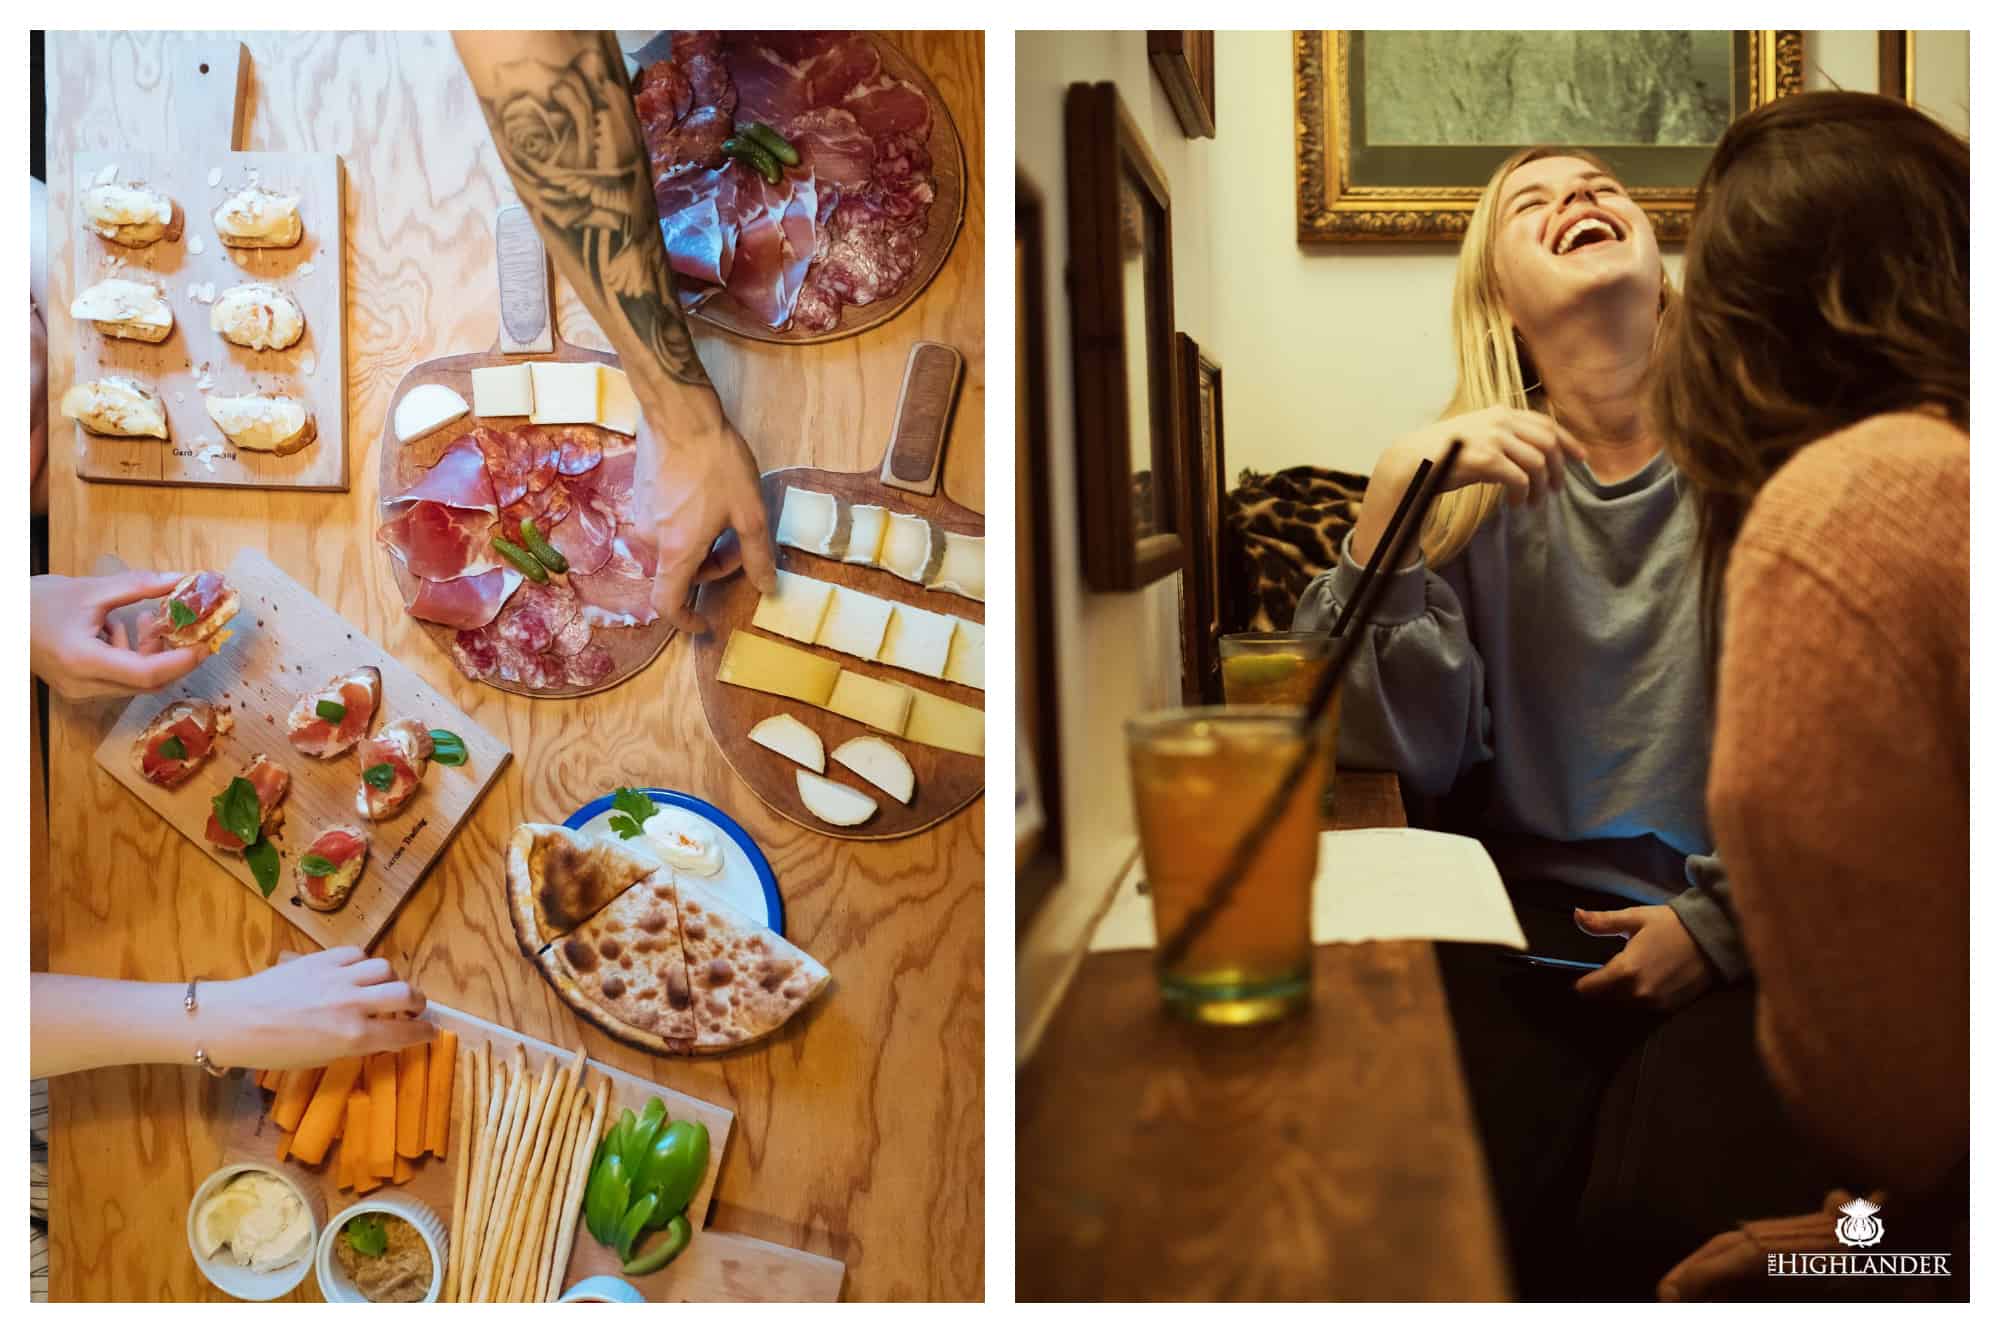 On left: Patrons of the Gossima Ping Pong Bar, in Paris' 11th arrondissement, descend on a sumptuous spread of cheese, charcuterie, bruschetta, and other shareable plates. On right: Two friends share a laugh at the trivia night hosted by The Highlander Scottish Bar in Paris' 6th arrondissement. 